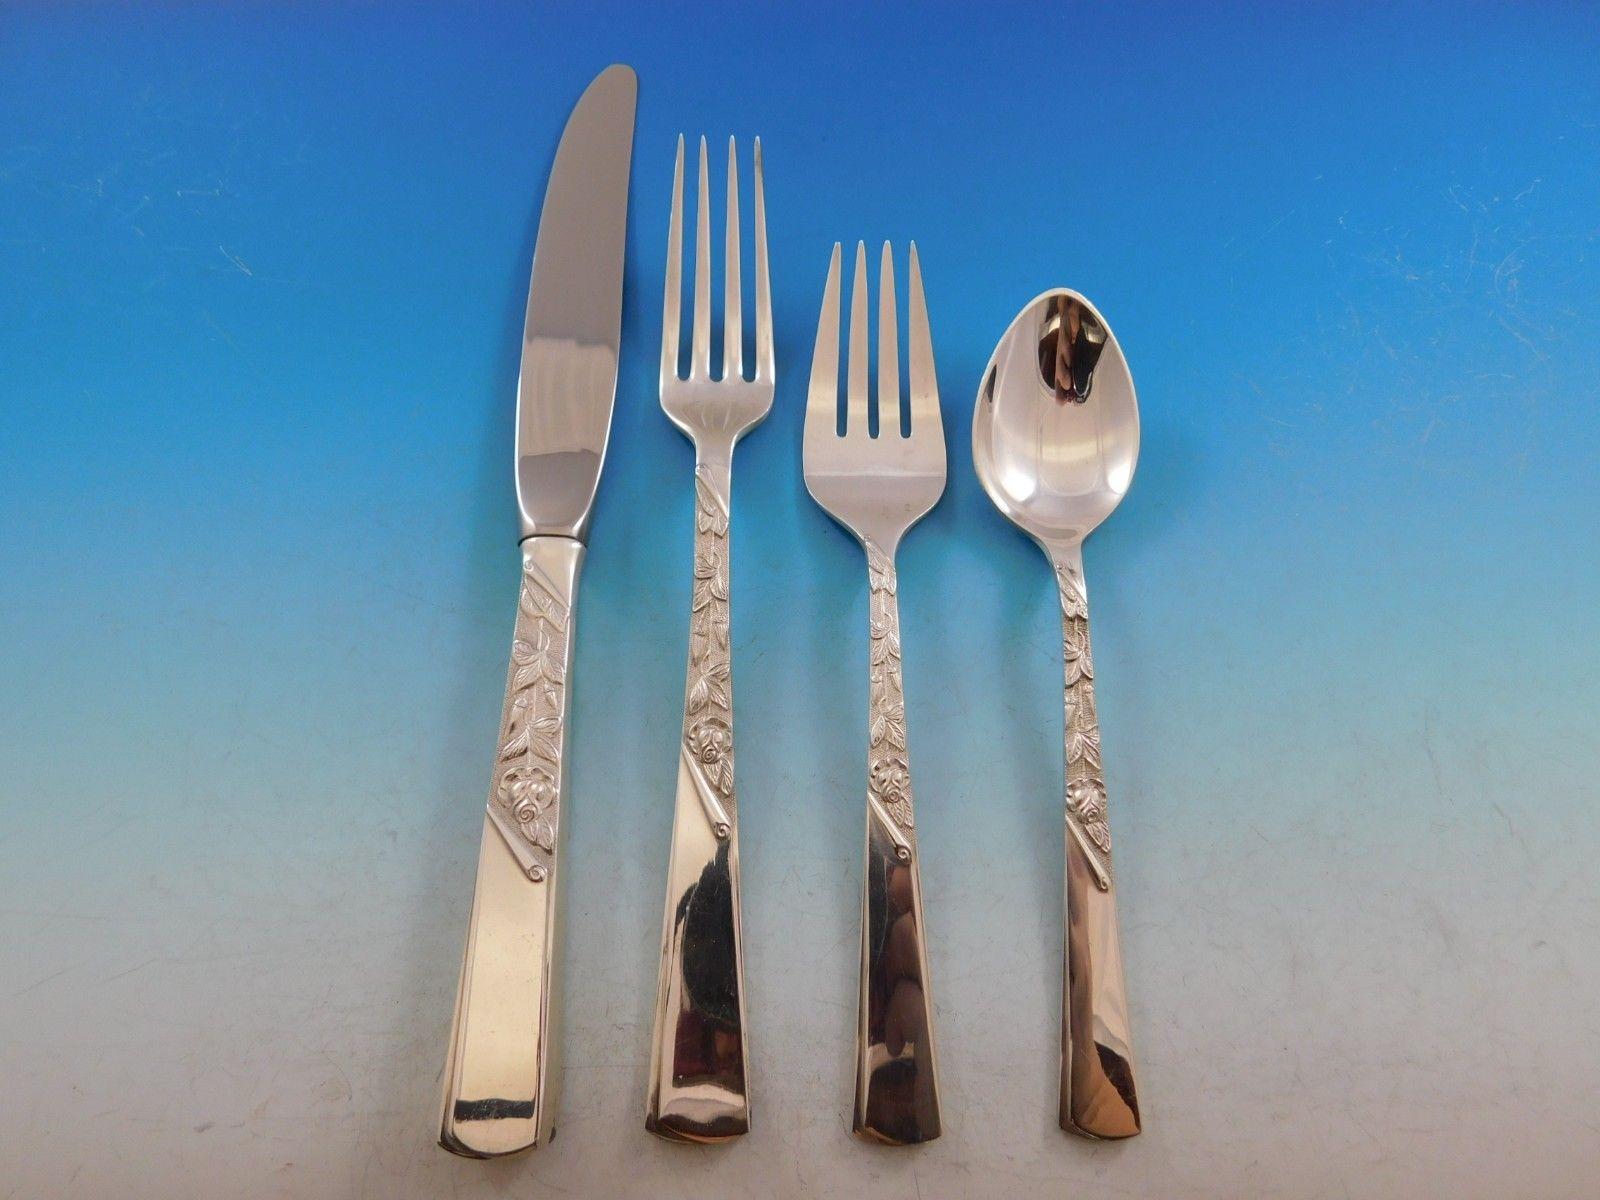 Lovely rose motif by Stieff sterling silver flatware set, 30 pieces. This set includes:

6 knives, 9